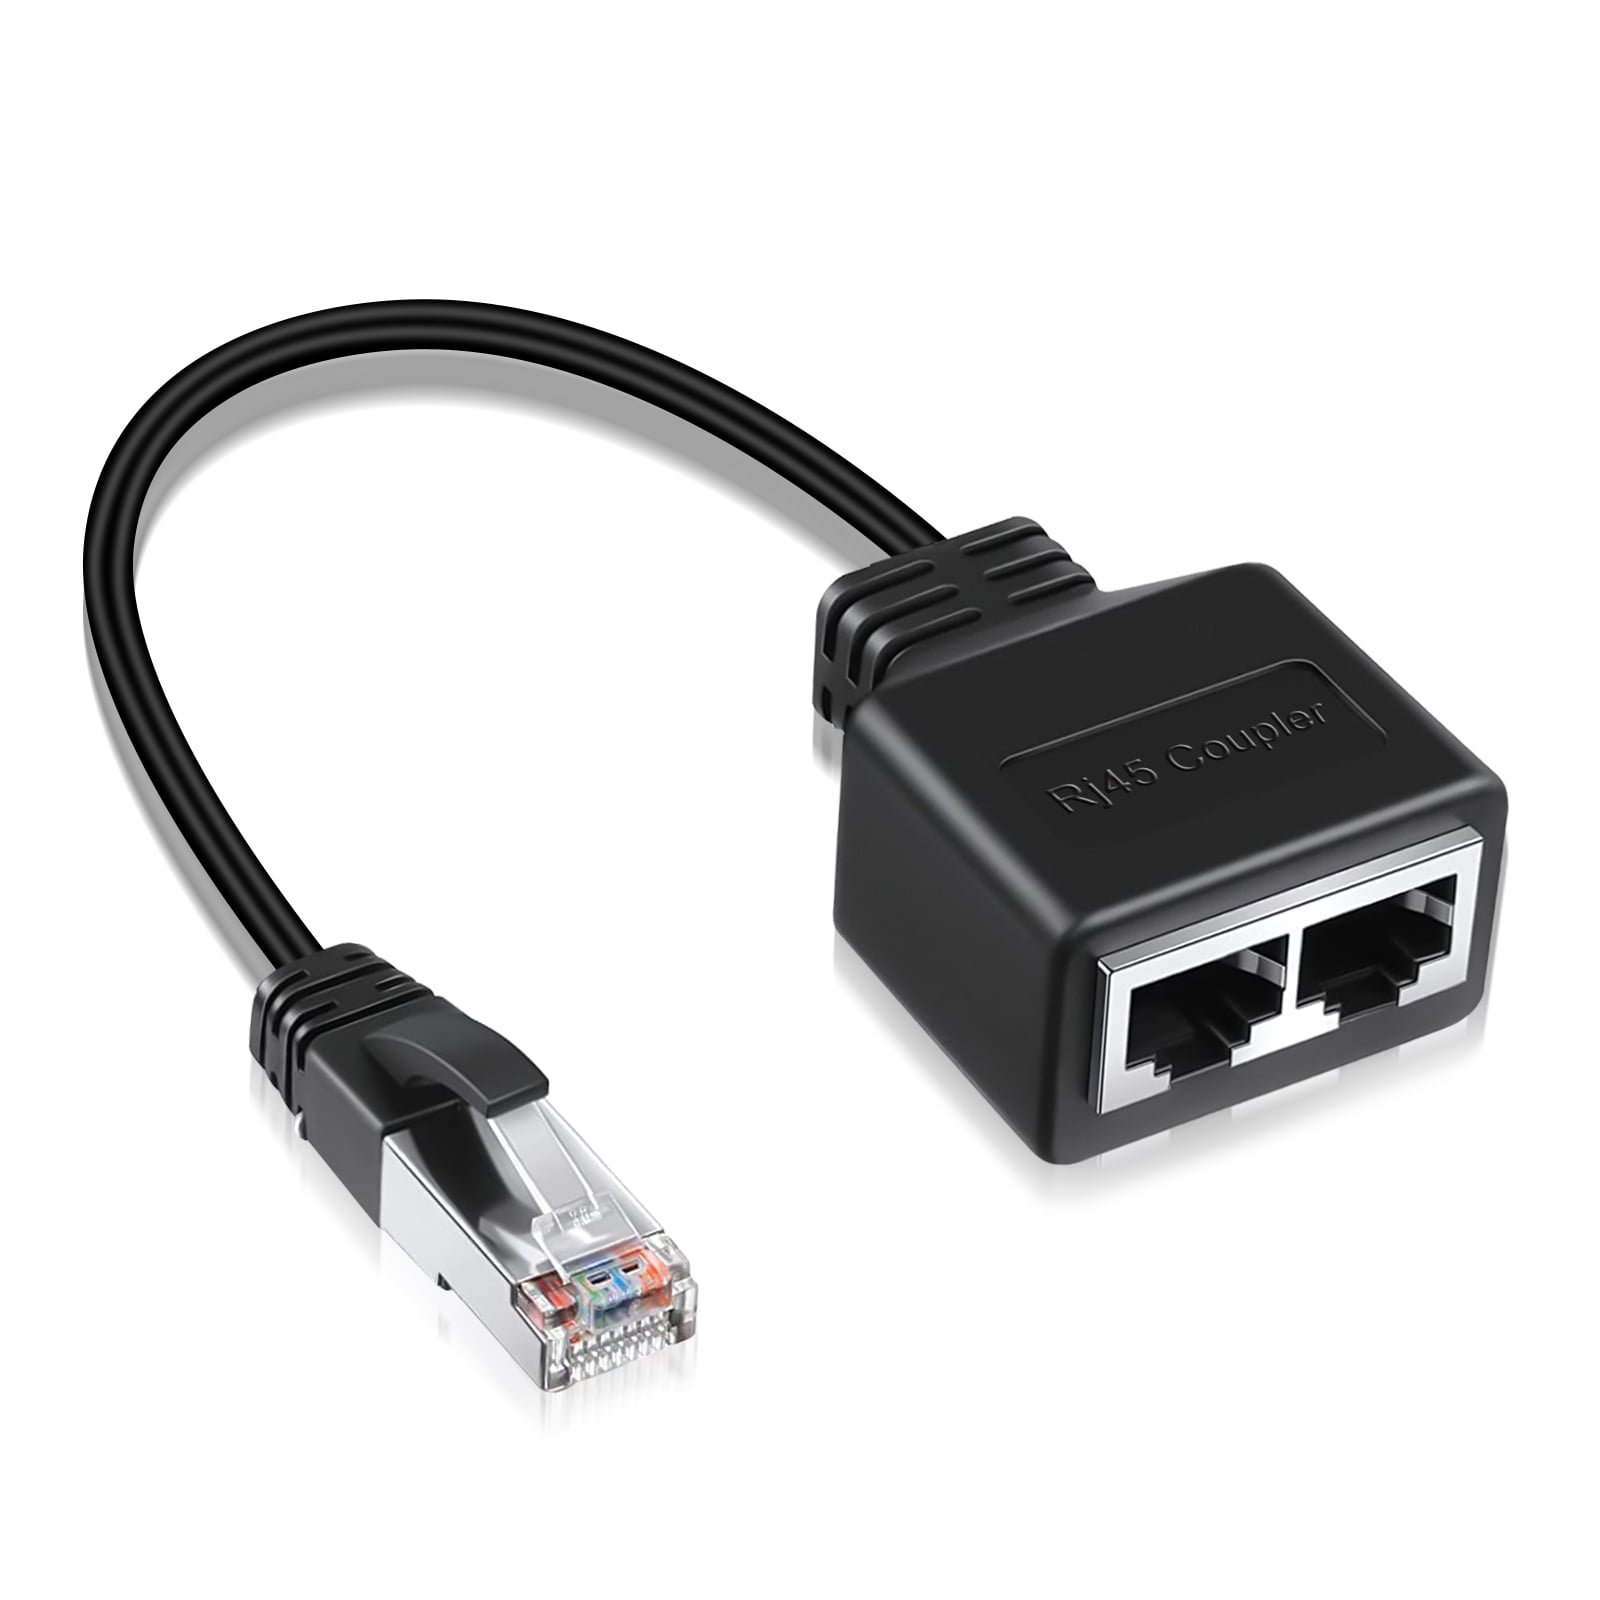 RJ45 Ethernet Splitter Cable, TSV 1 to 2 LAN Male to Female Network Adapter  Fit for Cat5, Cat5e, Cat6, Cat7 Ethernet Socket Connector 